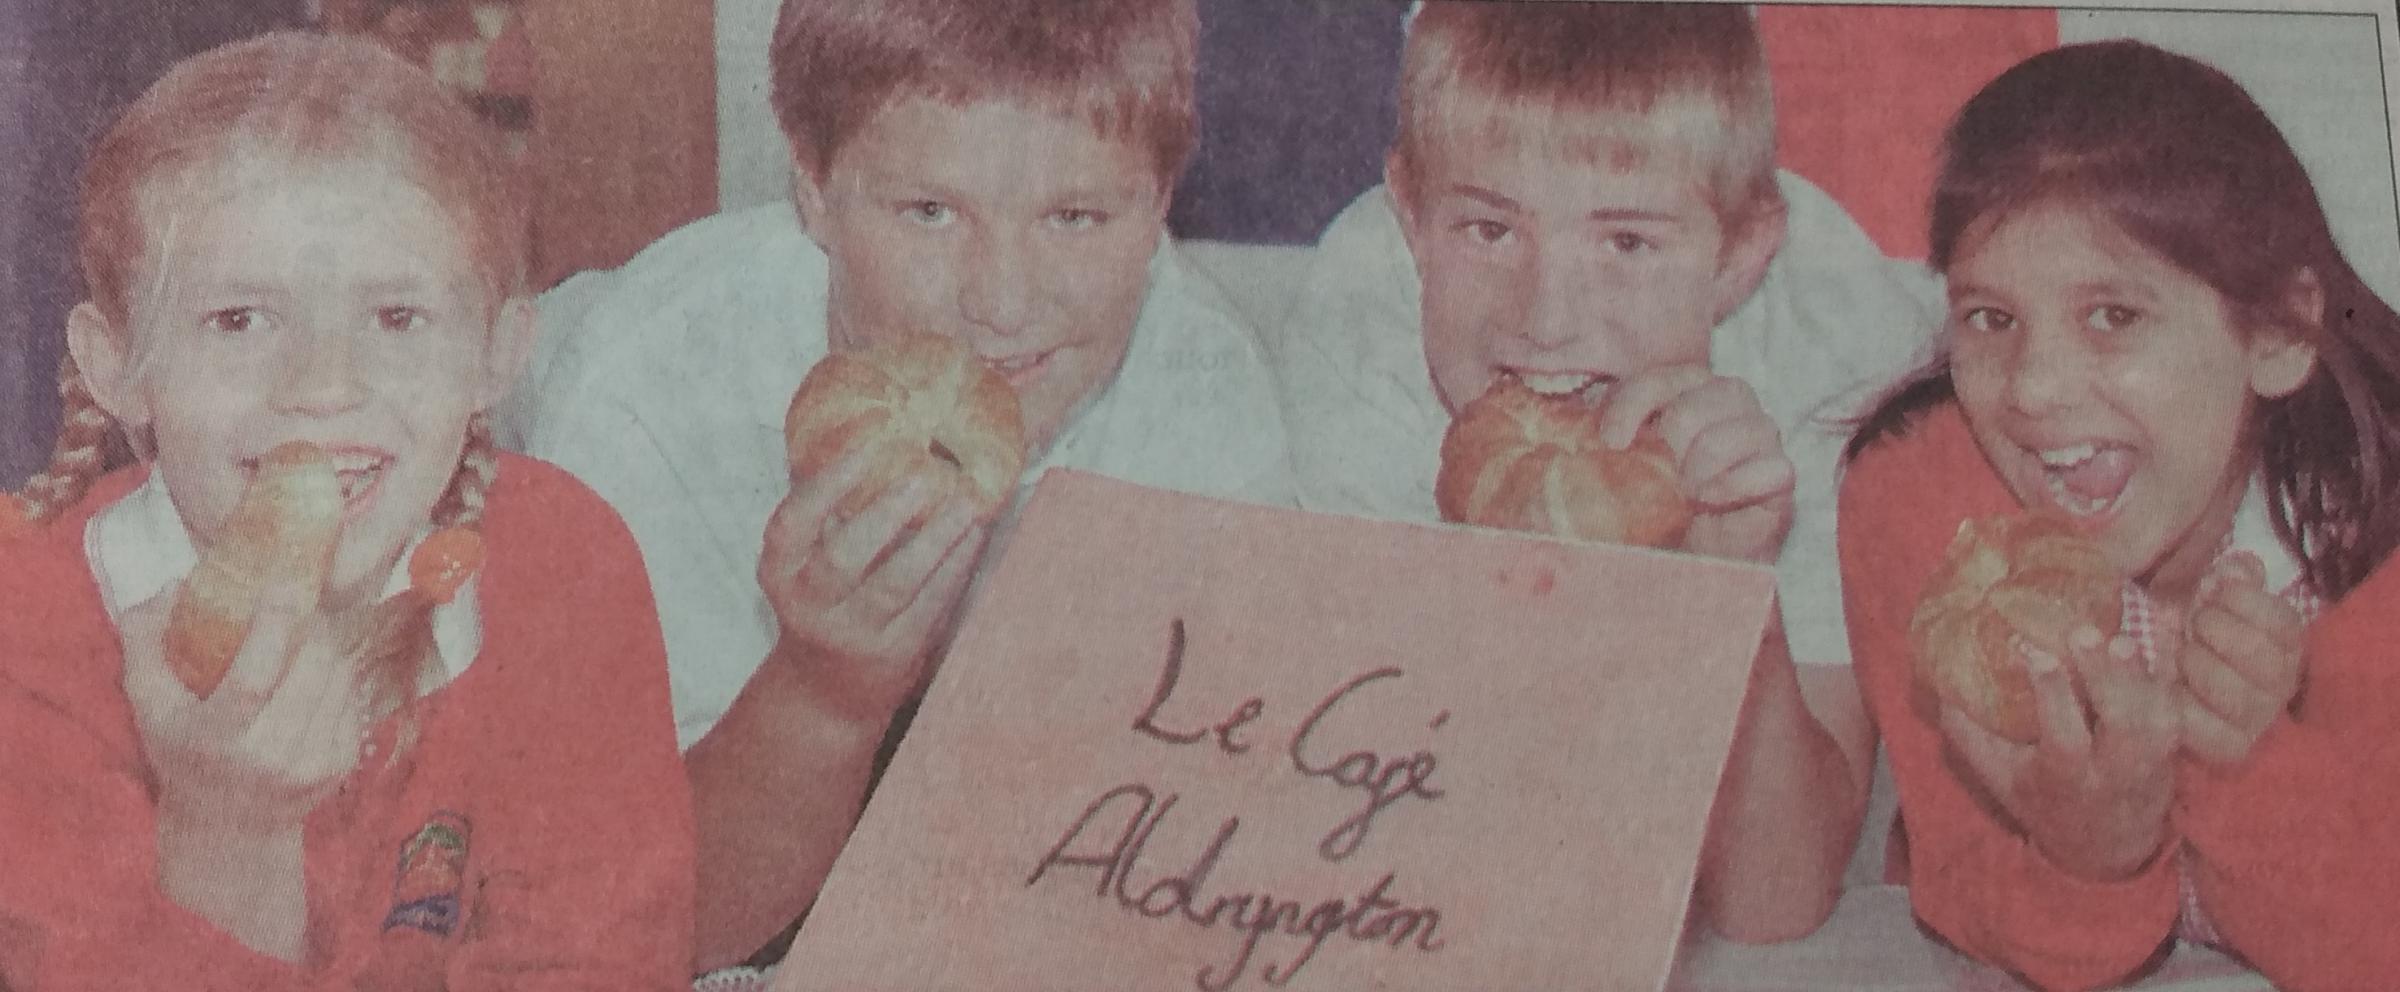 Several students eating French food to celebrate Bastille Day in 1999 